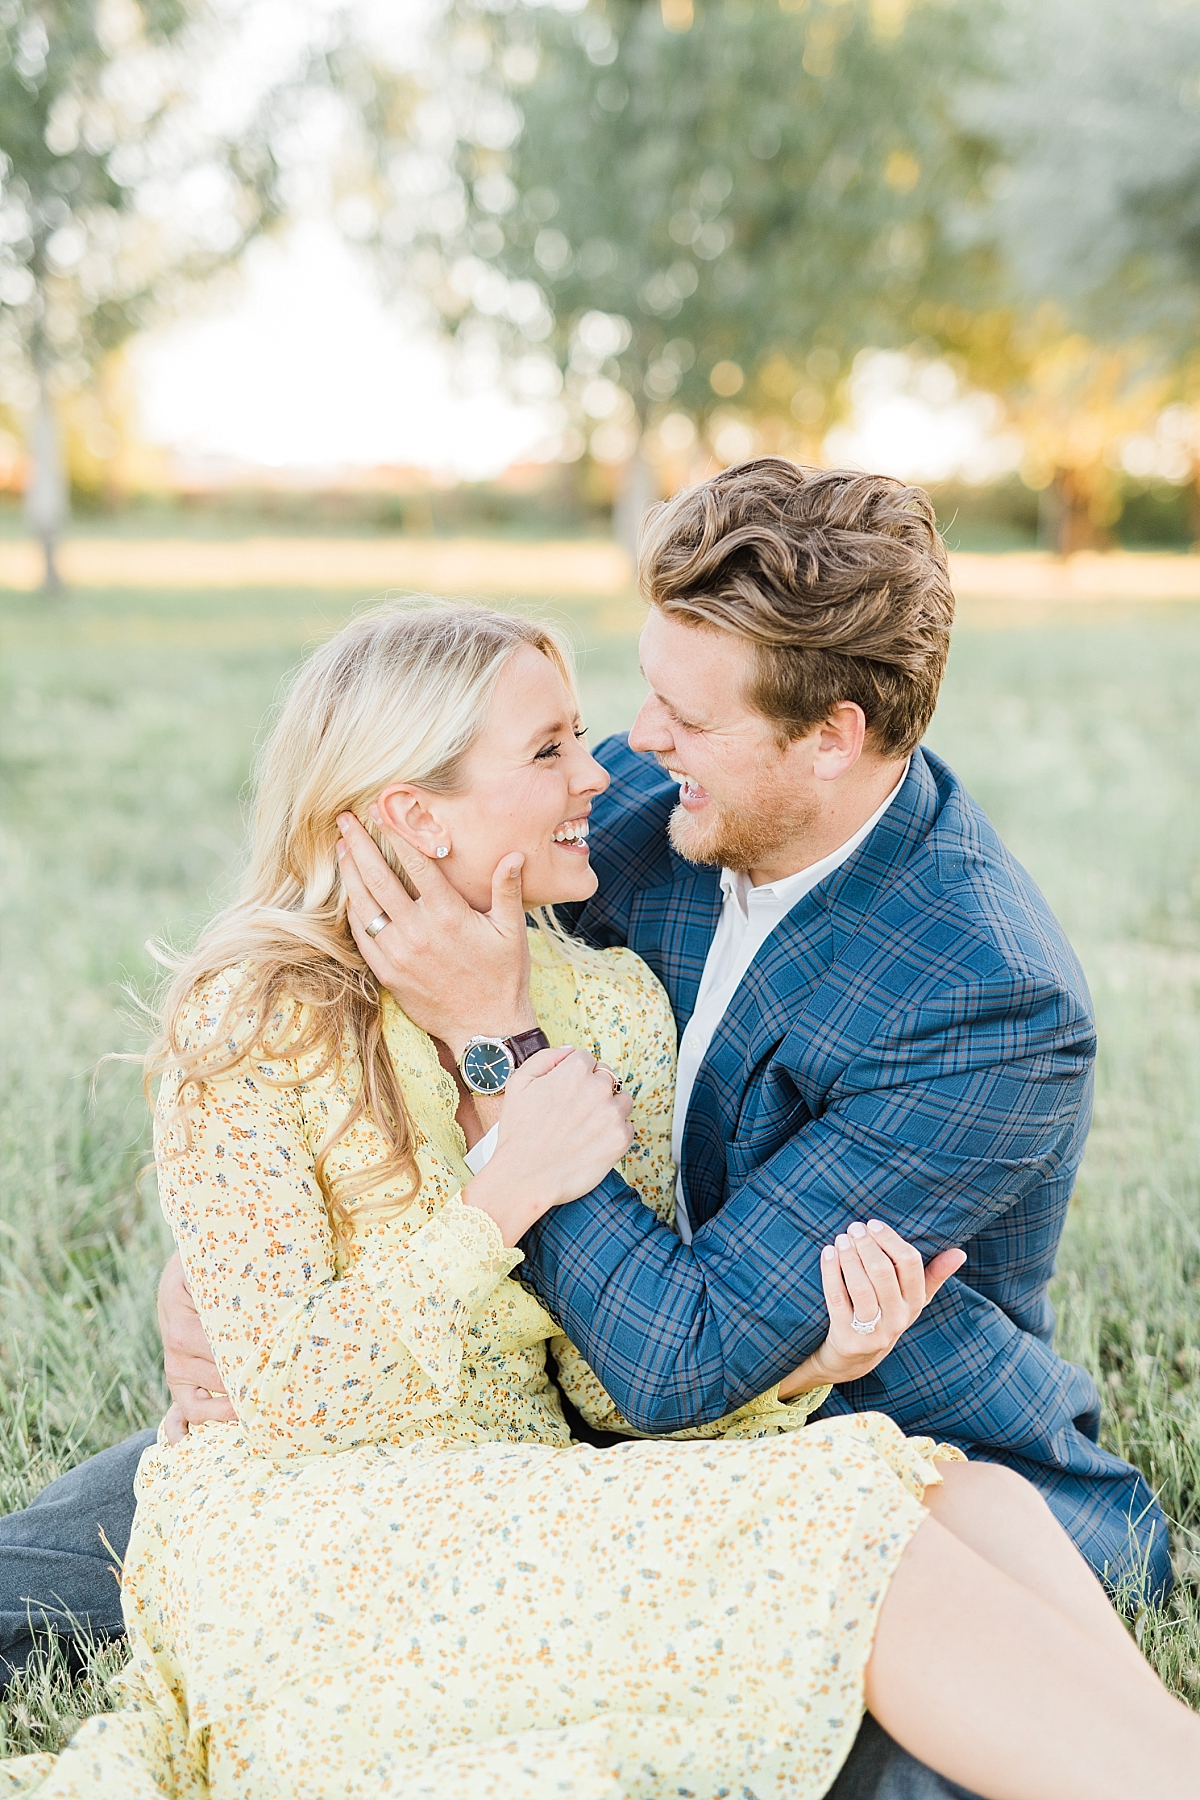 Bountiful pond couples session, twirling yellow dress and blue high heels, Pinstripe jacket and suit pants, Photography by Tasha Rose, Utah couples photographer